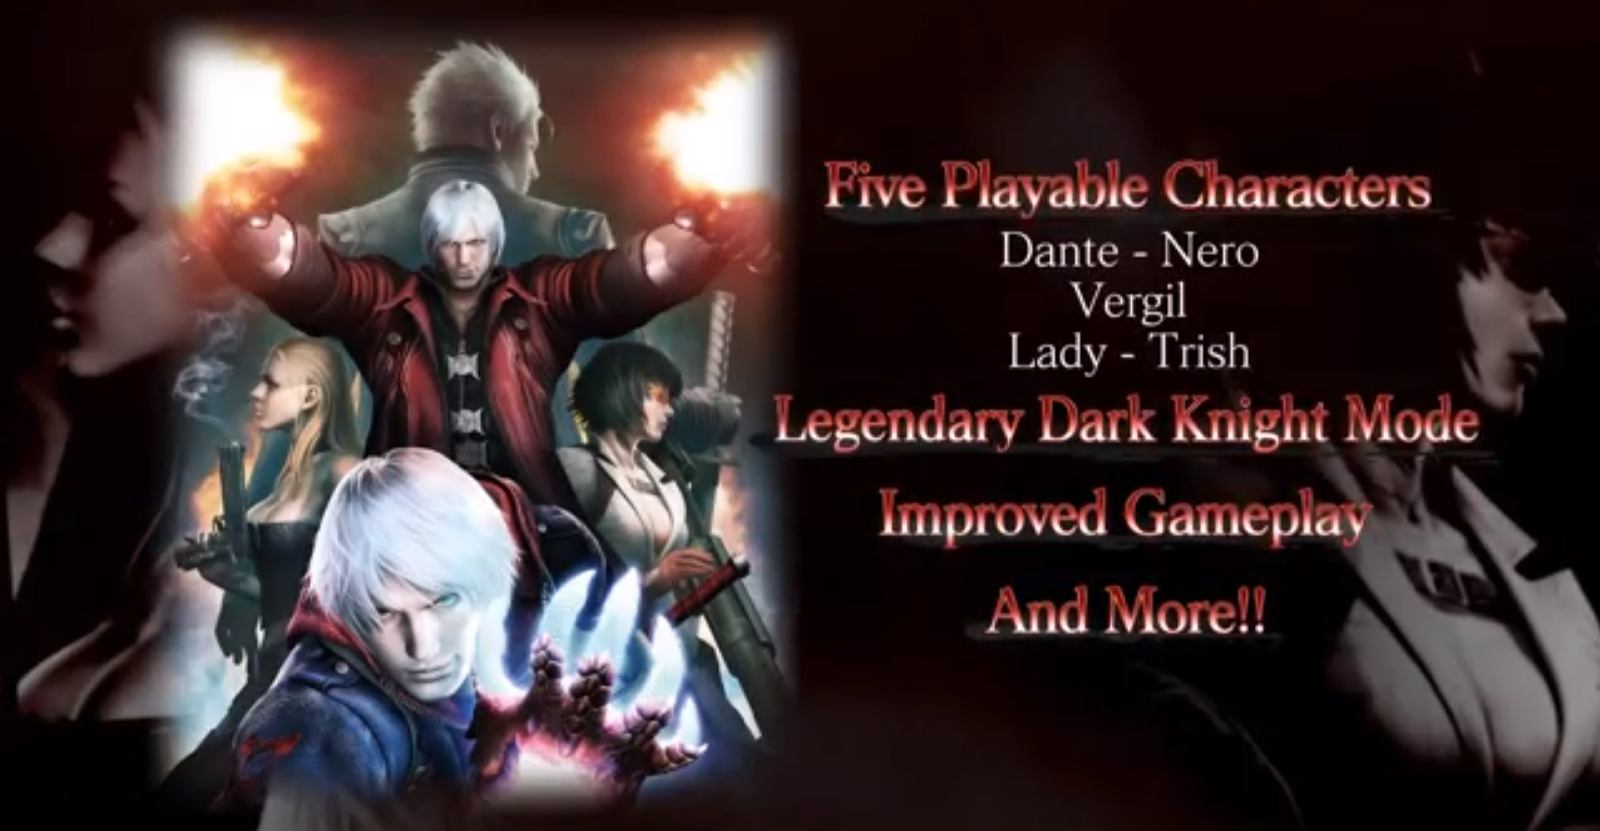 Devil May Cry 4 Photo: Devil May Cry 4 Characters  Devil may cry 4, Devil  may cry, Dante devil may cry